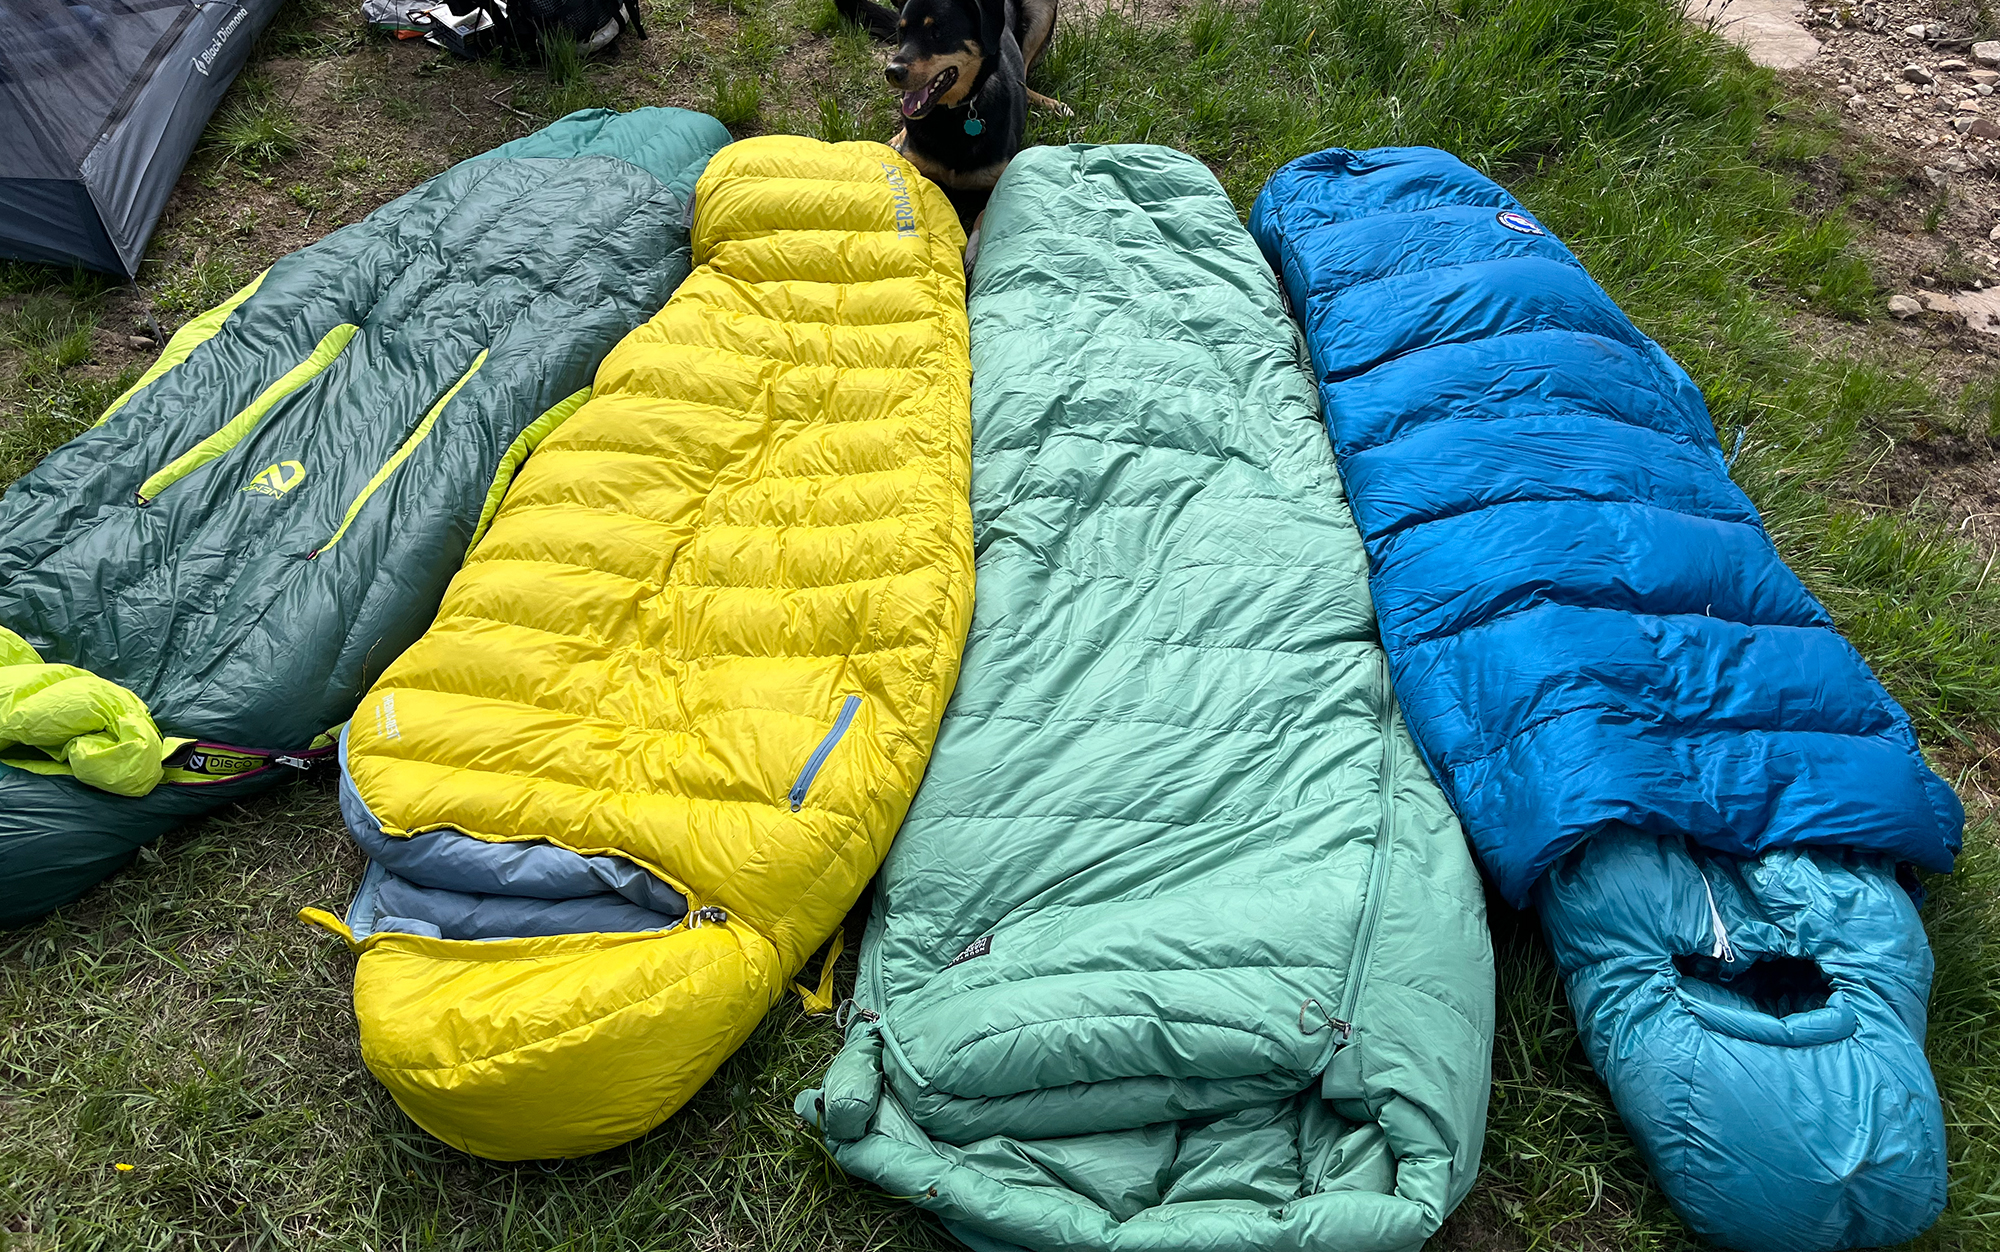 Sleeping bags lay in the grass.